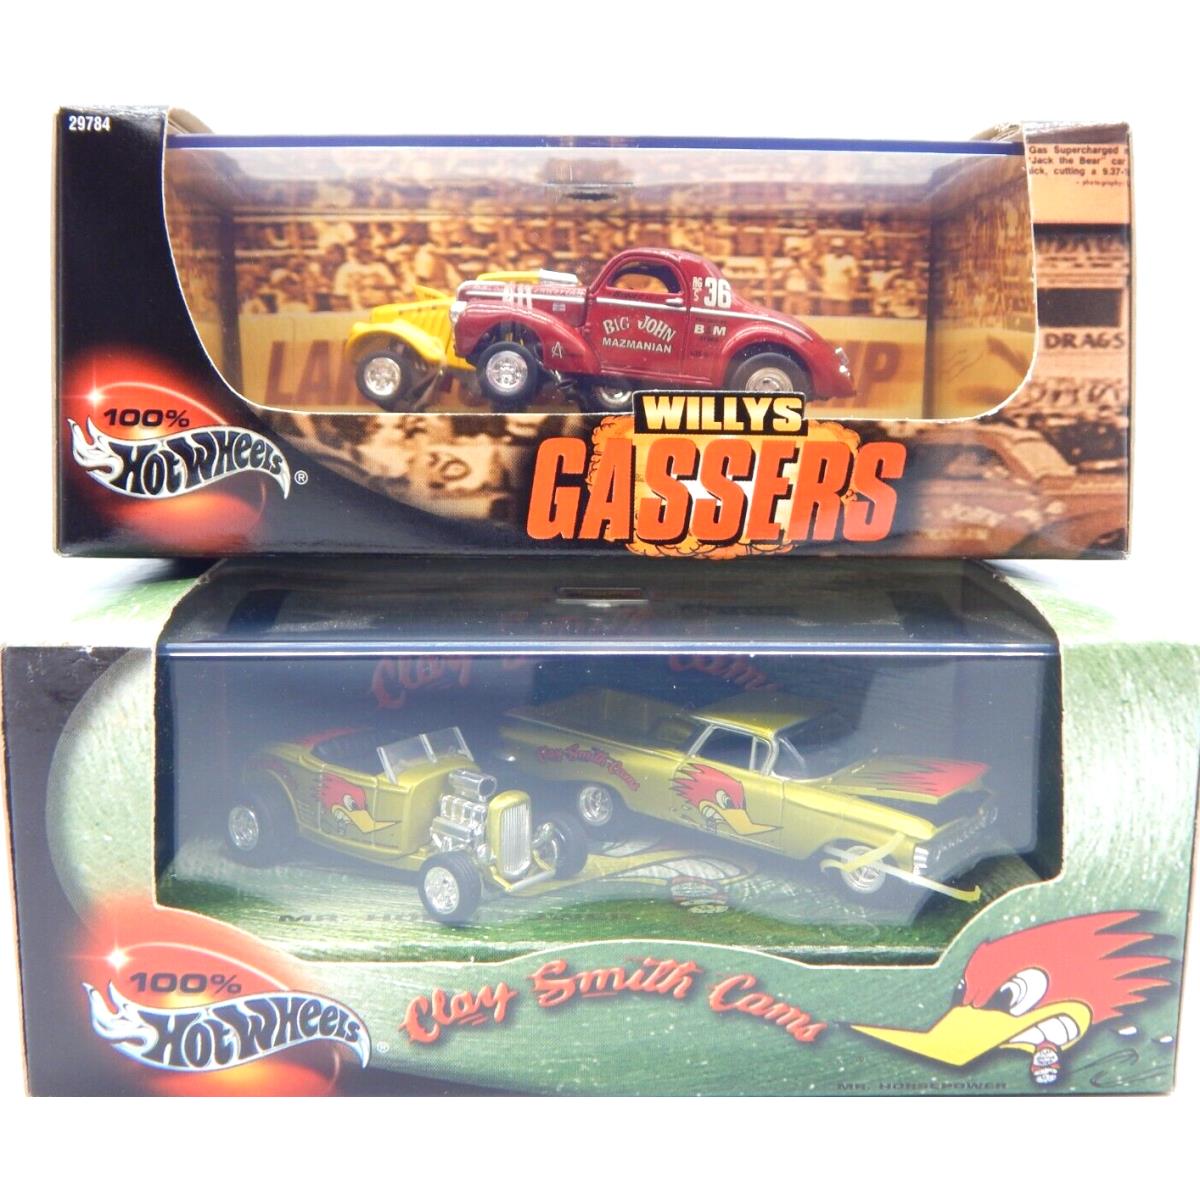 1:64TH 2 Hot Wheels Sets 2000 Clay Smith Cams Willys Gassers Series - RTC1686